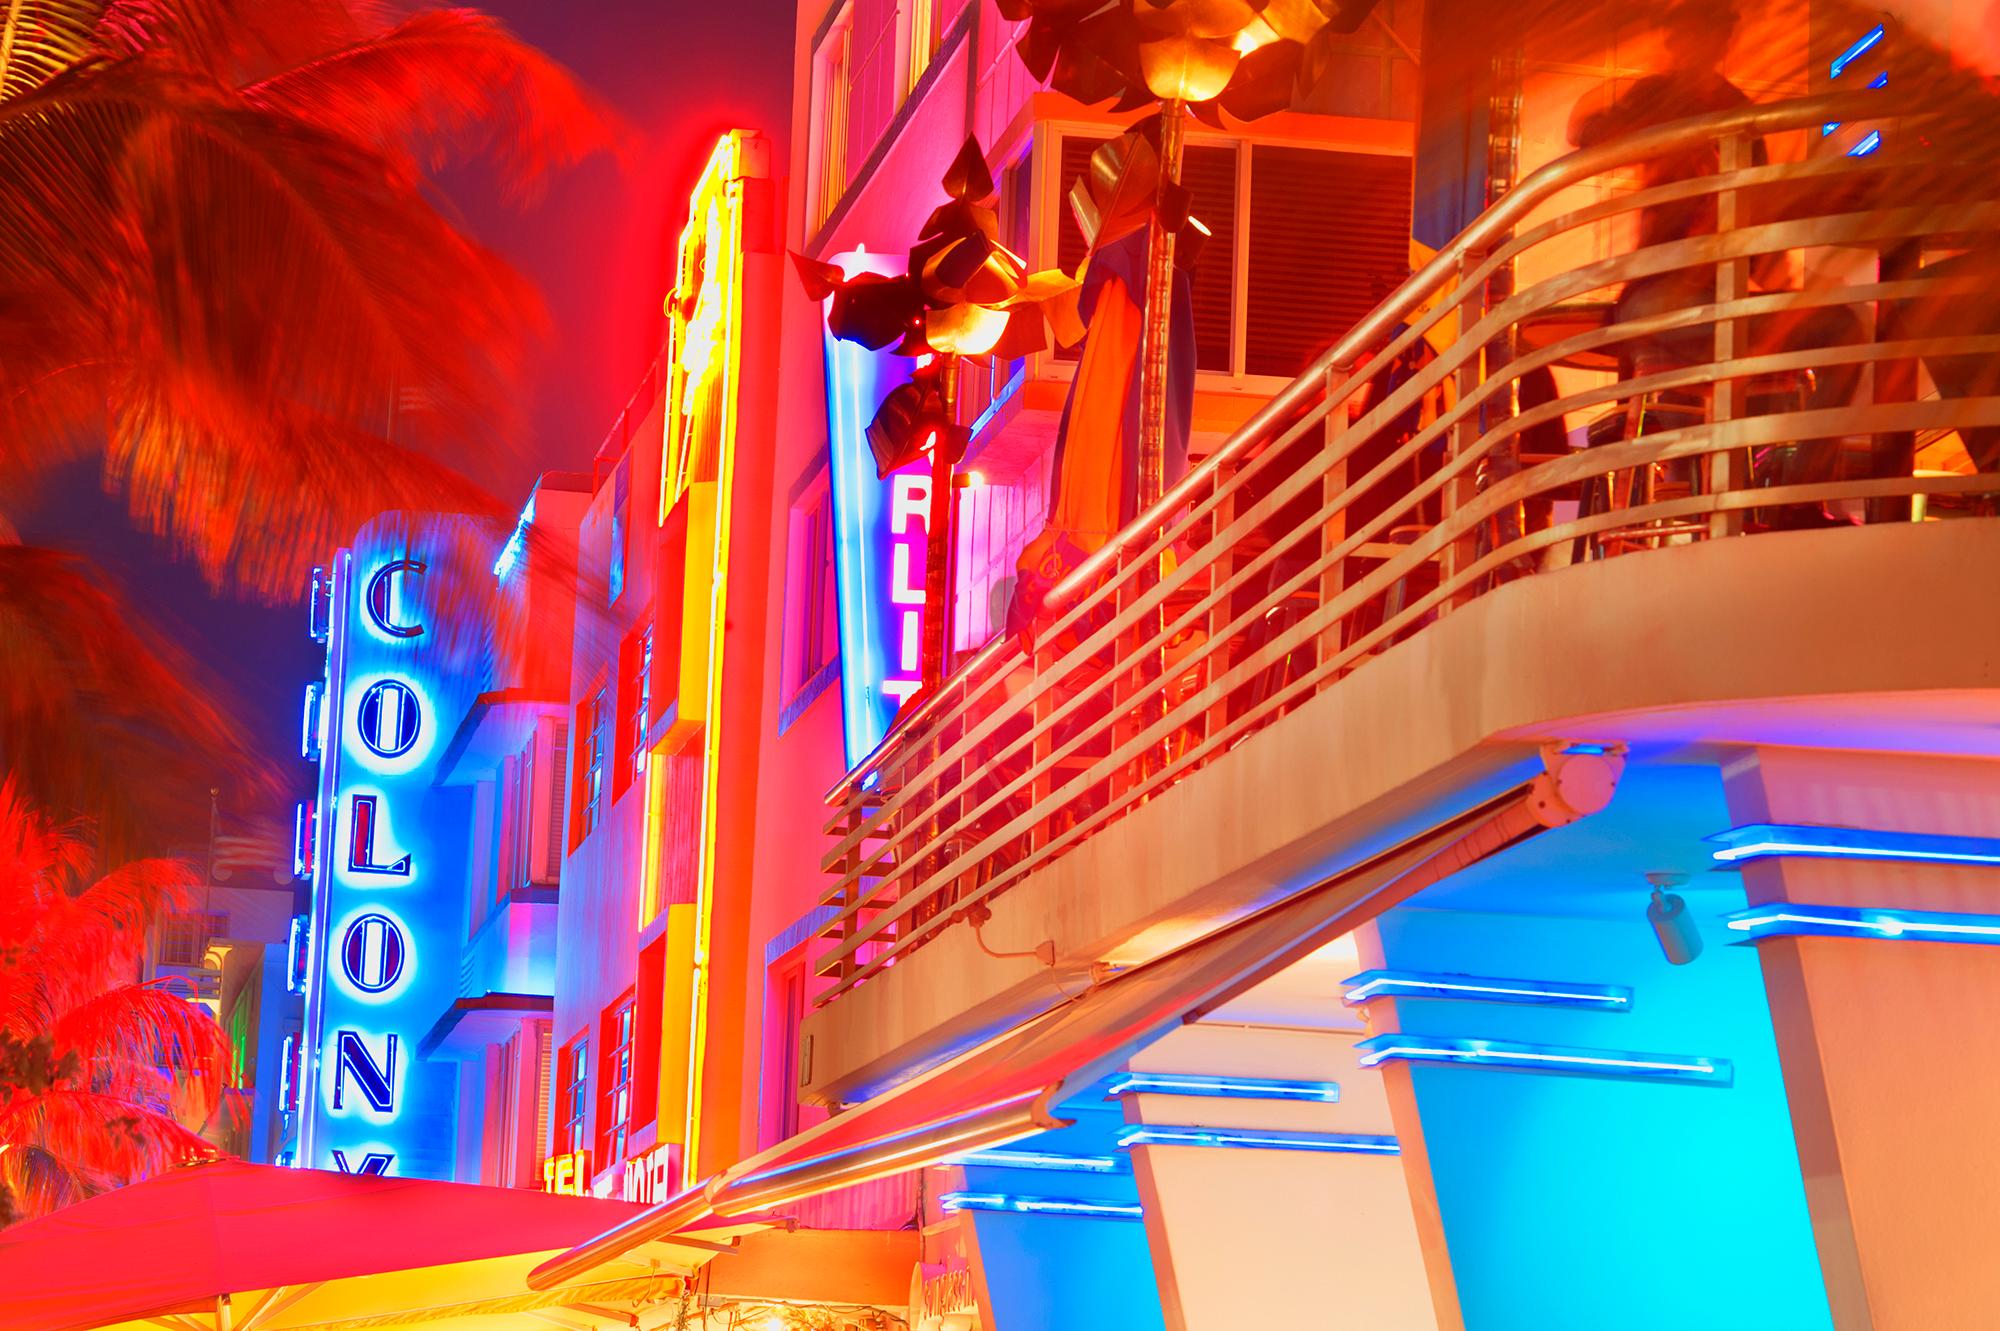 Mitchell Funk Landscape Photograph - Colony Hotel Ocean Drive, South Beach at Night  Tropical Neon Reds and Neon Blue